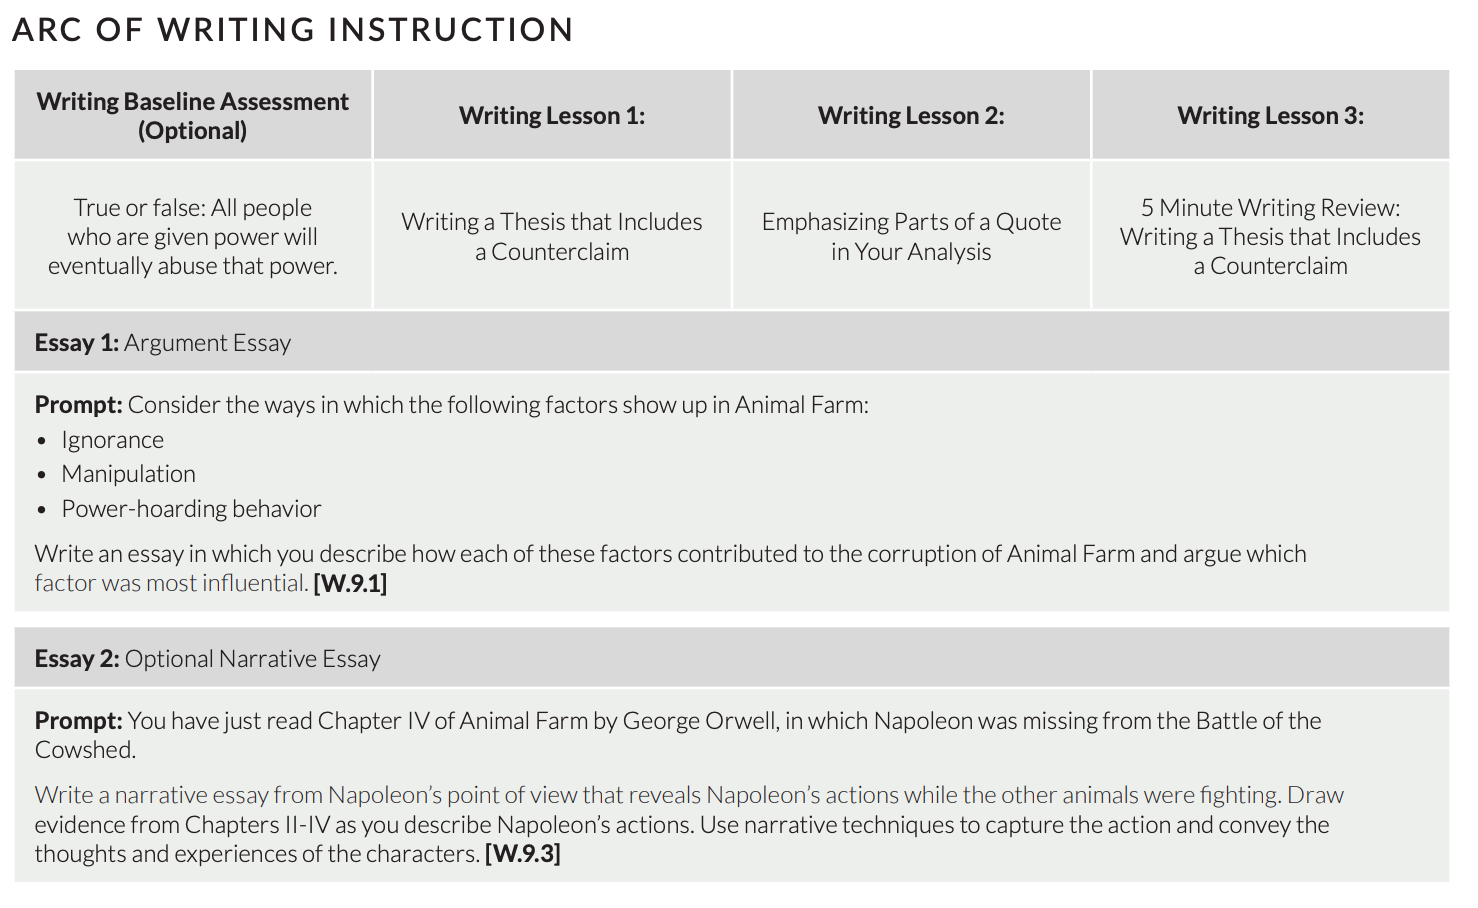 This is a screenshot of the arc of writing instruction for the unit. Lessons include how to write a thesis that includes a counterclaim, emphasizing parts of a quote in your analysis, and writing a thesis that includes a counterclaim. Then, students will write a literary analysis essay as the end of unit assessment. 